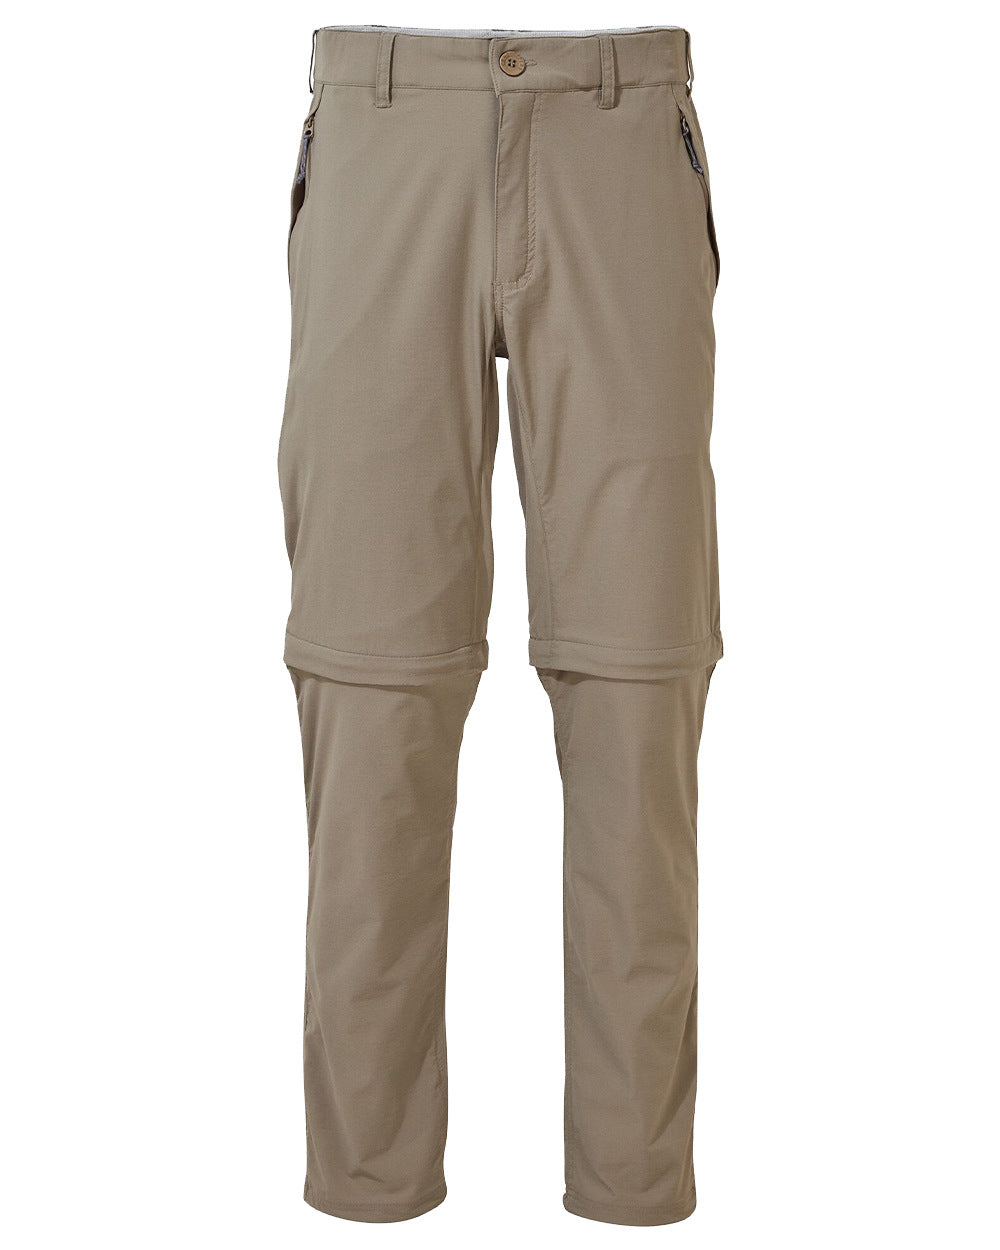 Pebble Coloured Craghoppers Mens NosiLife Pro Convertible II Trousers On A White Background